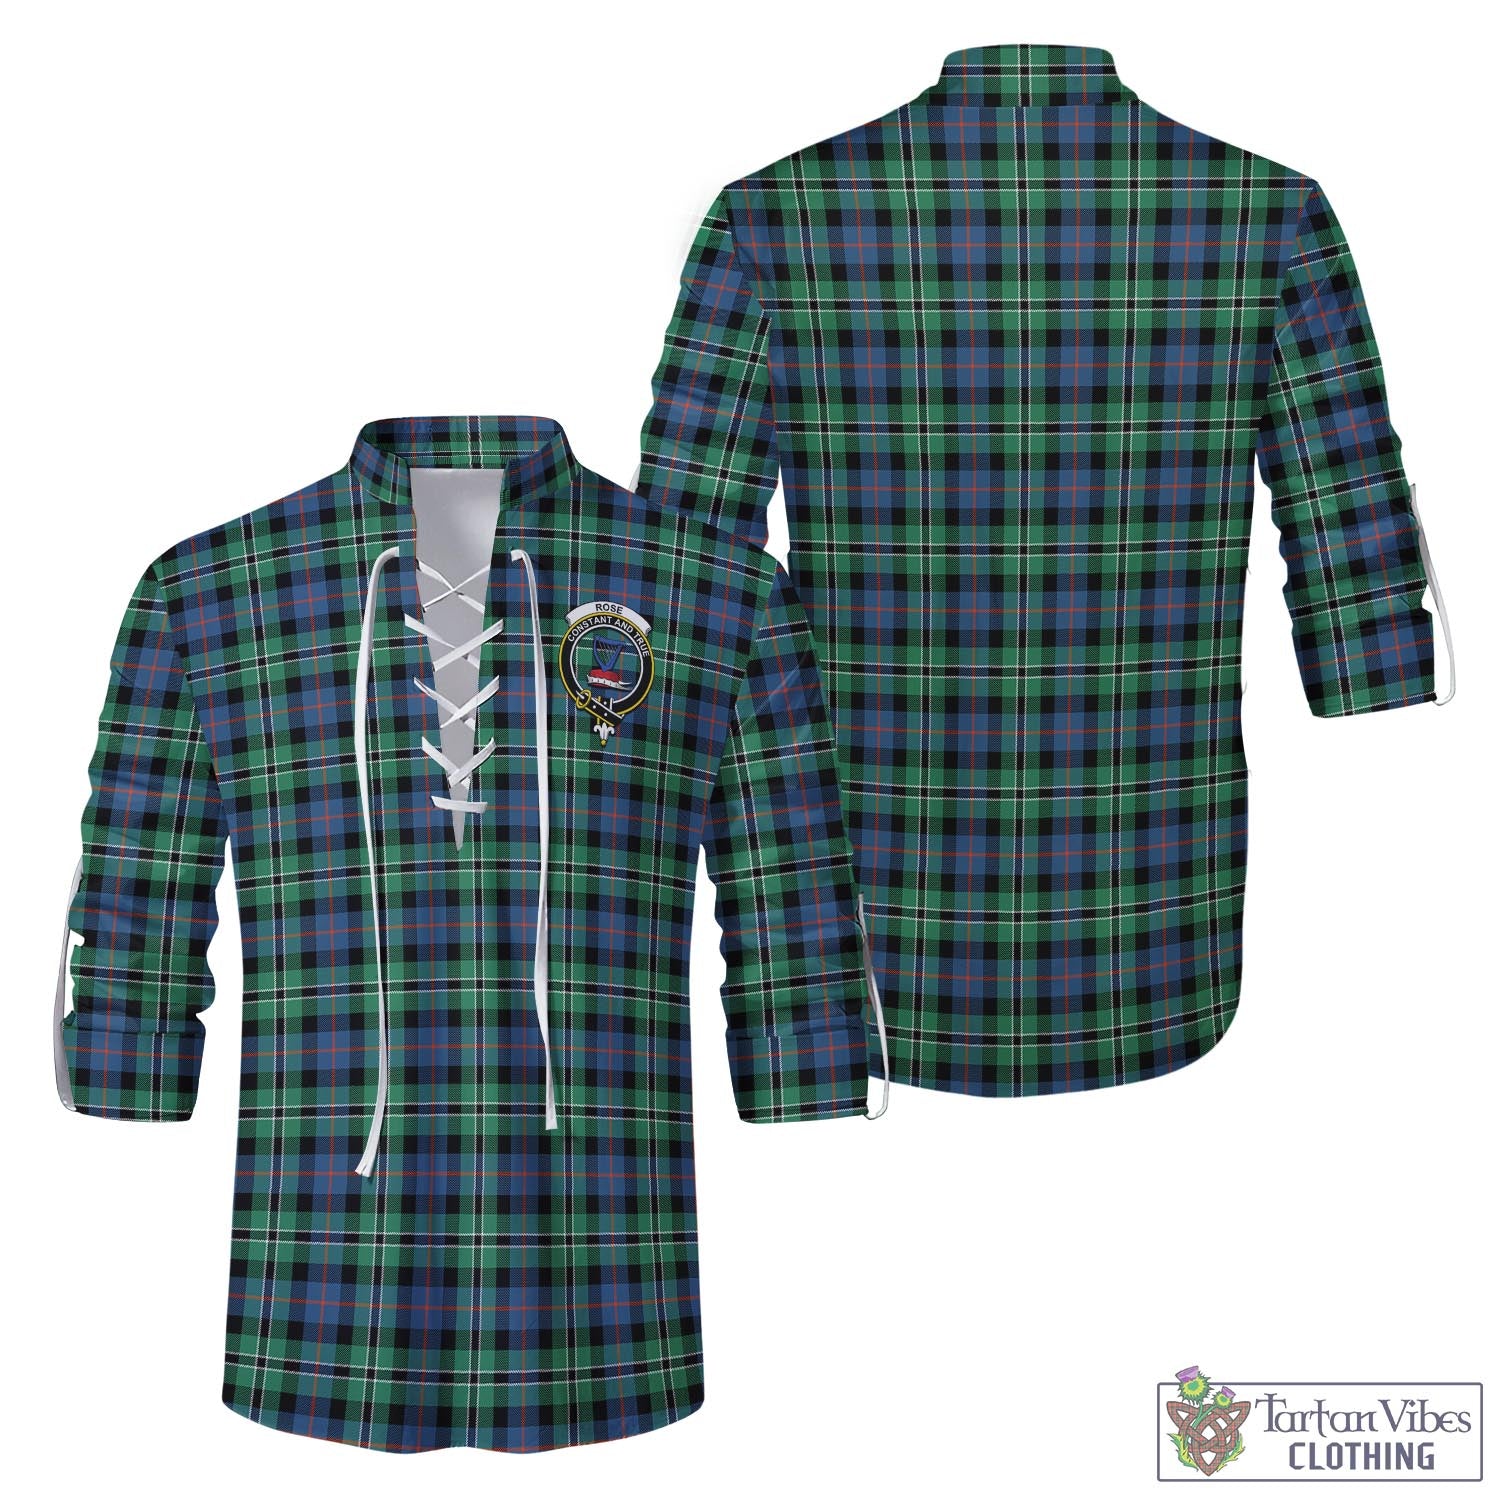 Tartan Vibes Clothing Rose Hunting Ancient Tartan Men's Scottish Traditional Jacobite Ghillie Kilt Shirt with Family Crest